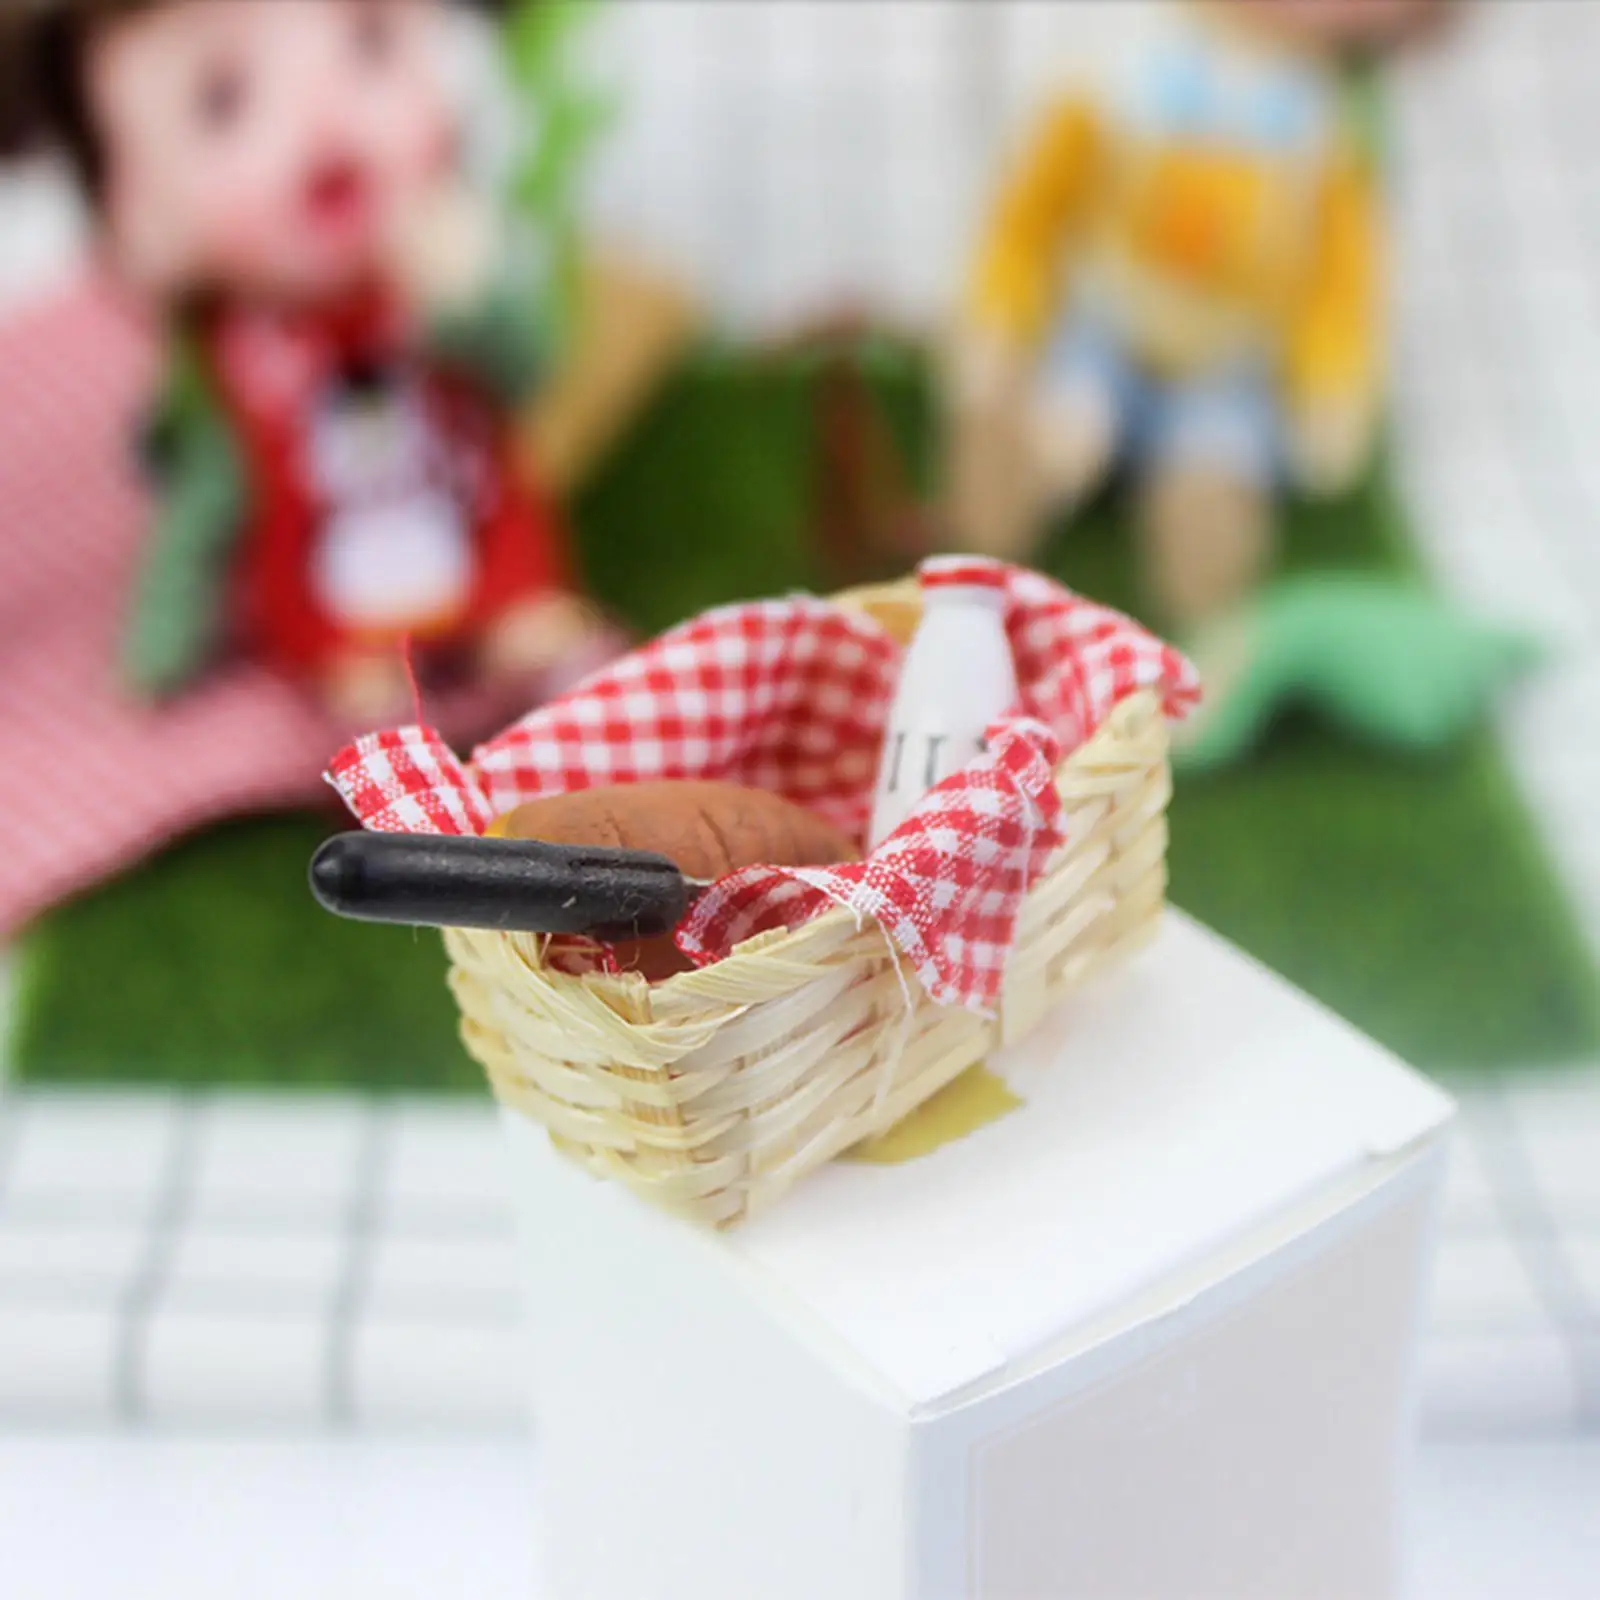 1/12 Miniature Bread Basket Tiny Food Dollhouse Decoration Accessories Picnic Basket for Dining Table Resaurant Decoration